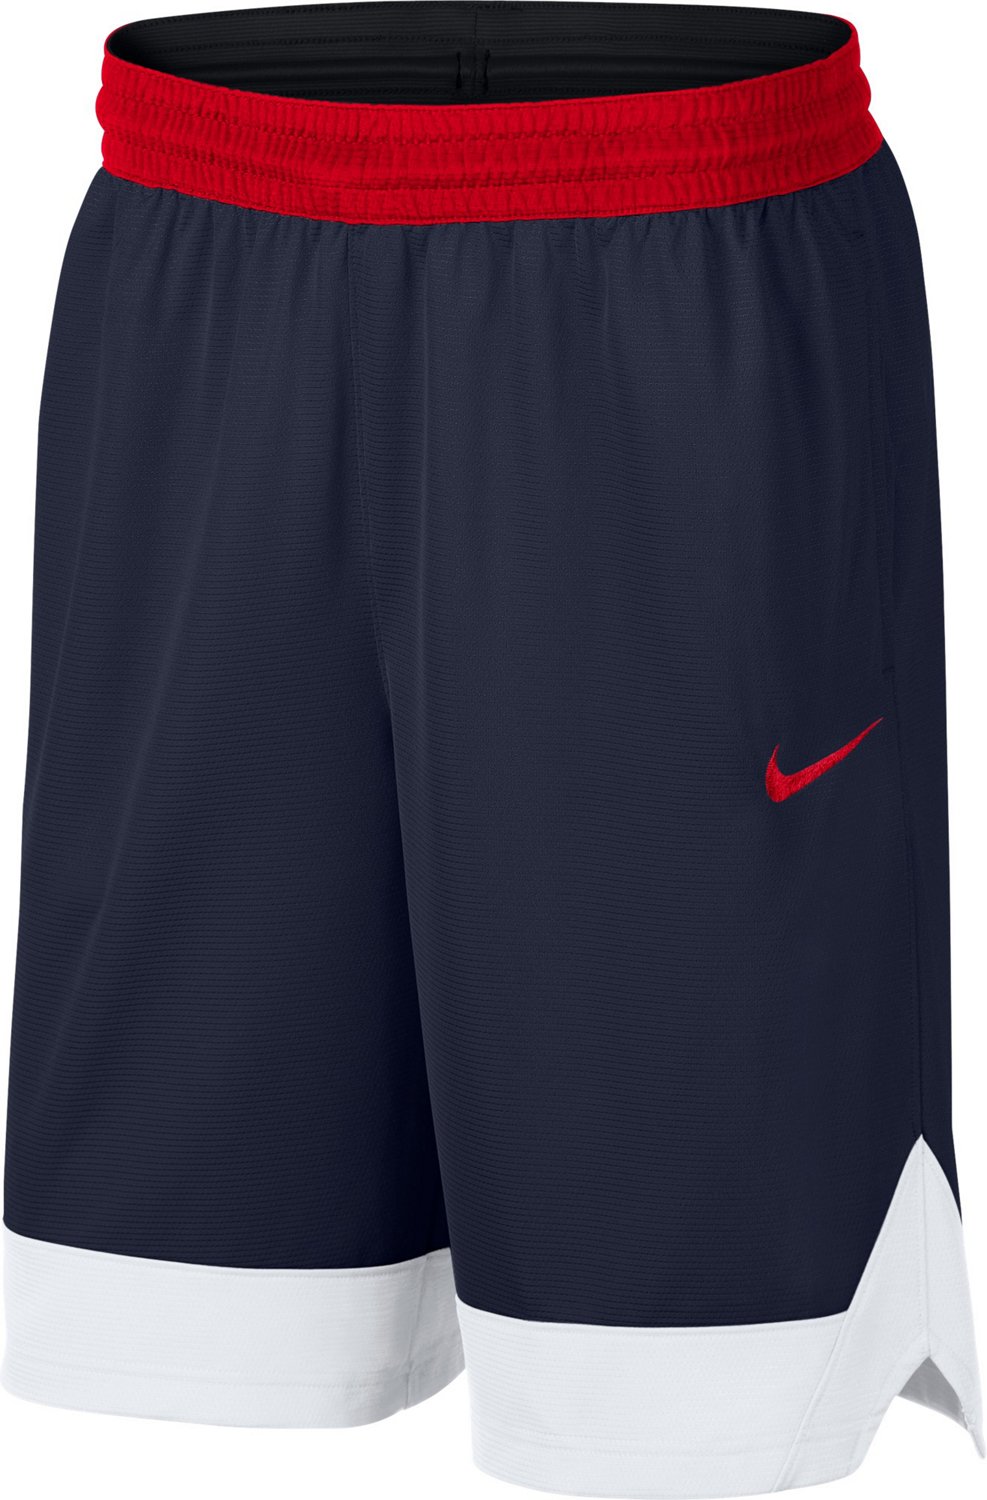 nike shorts blue and red